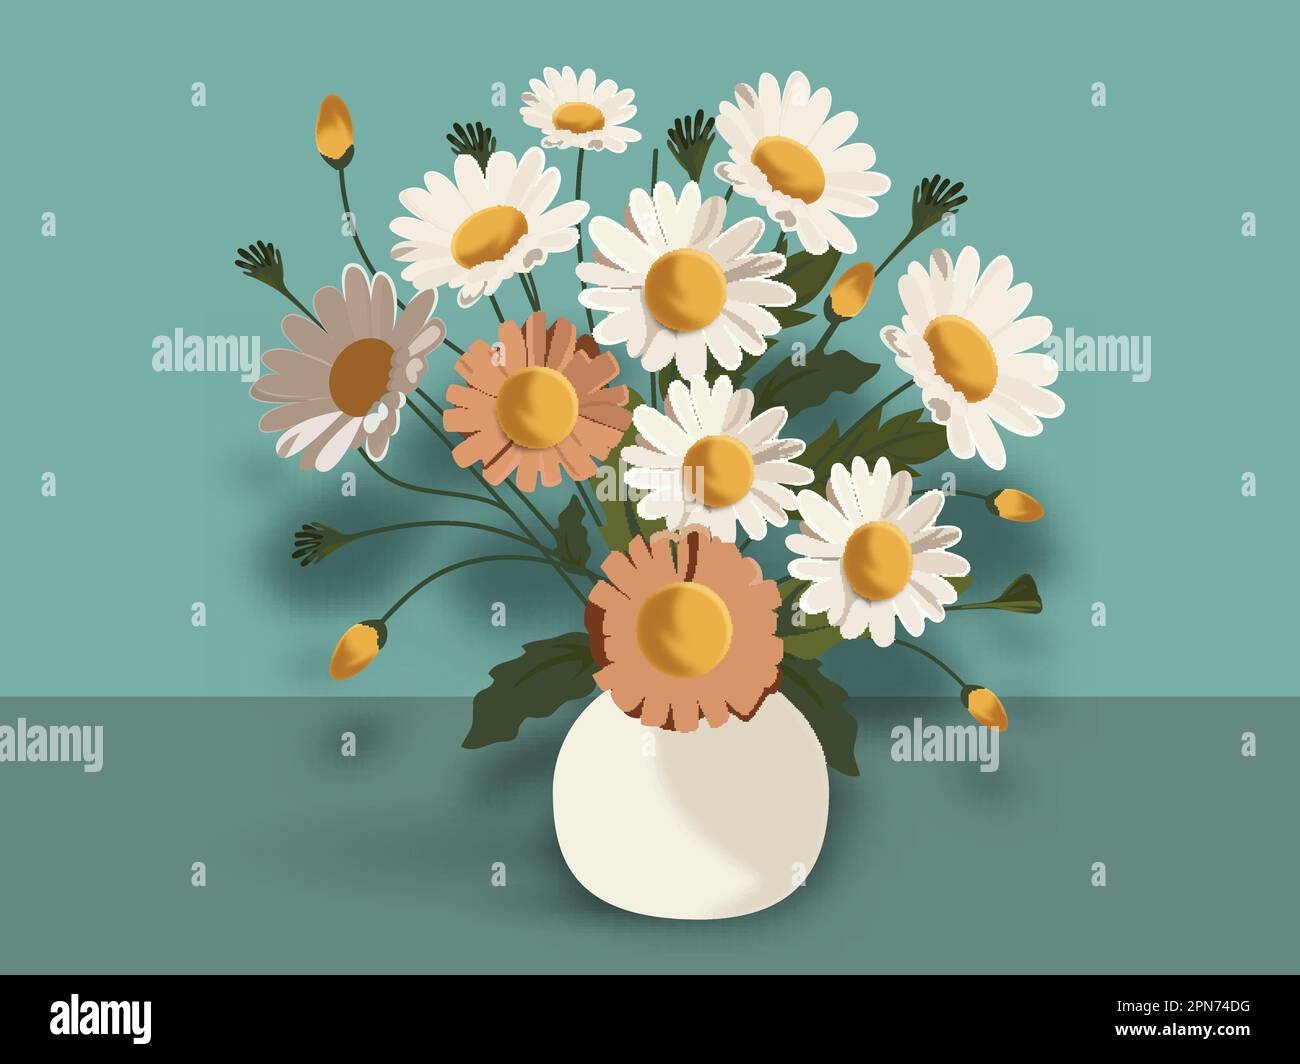 Illustration of Daisies Plant Pot On Pastel Turquoise Background. Stock Vector